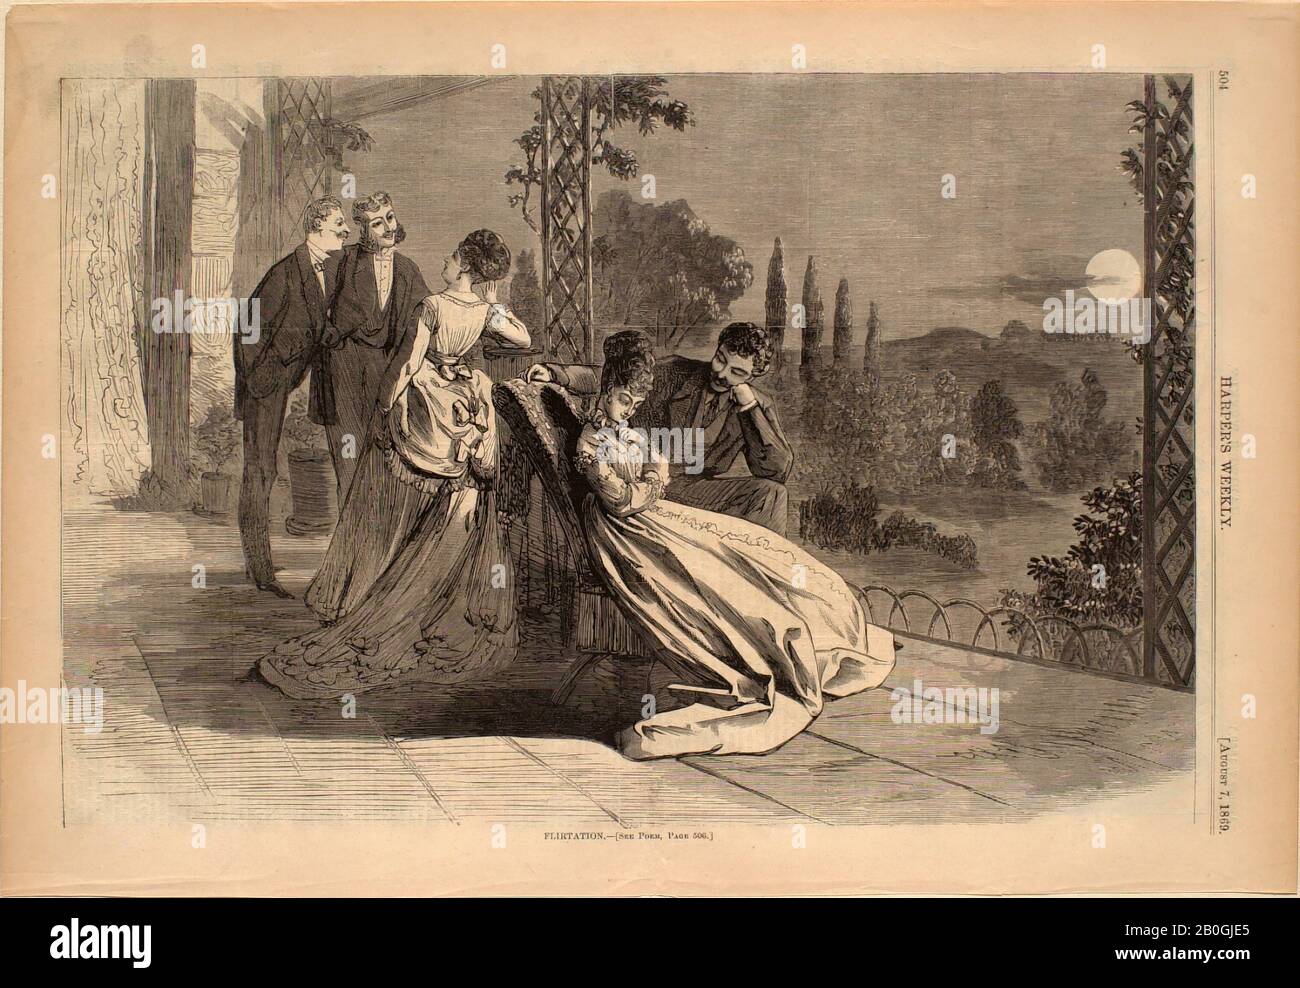 Unknown, Flirtation, From Harper's Weekly, 1869, Wood engraving on paper, image: 9 3/16 x 13 7/8 in. (23.4 x 35.3 cm Stock Photo